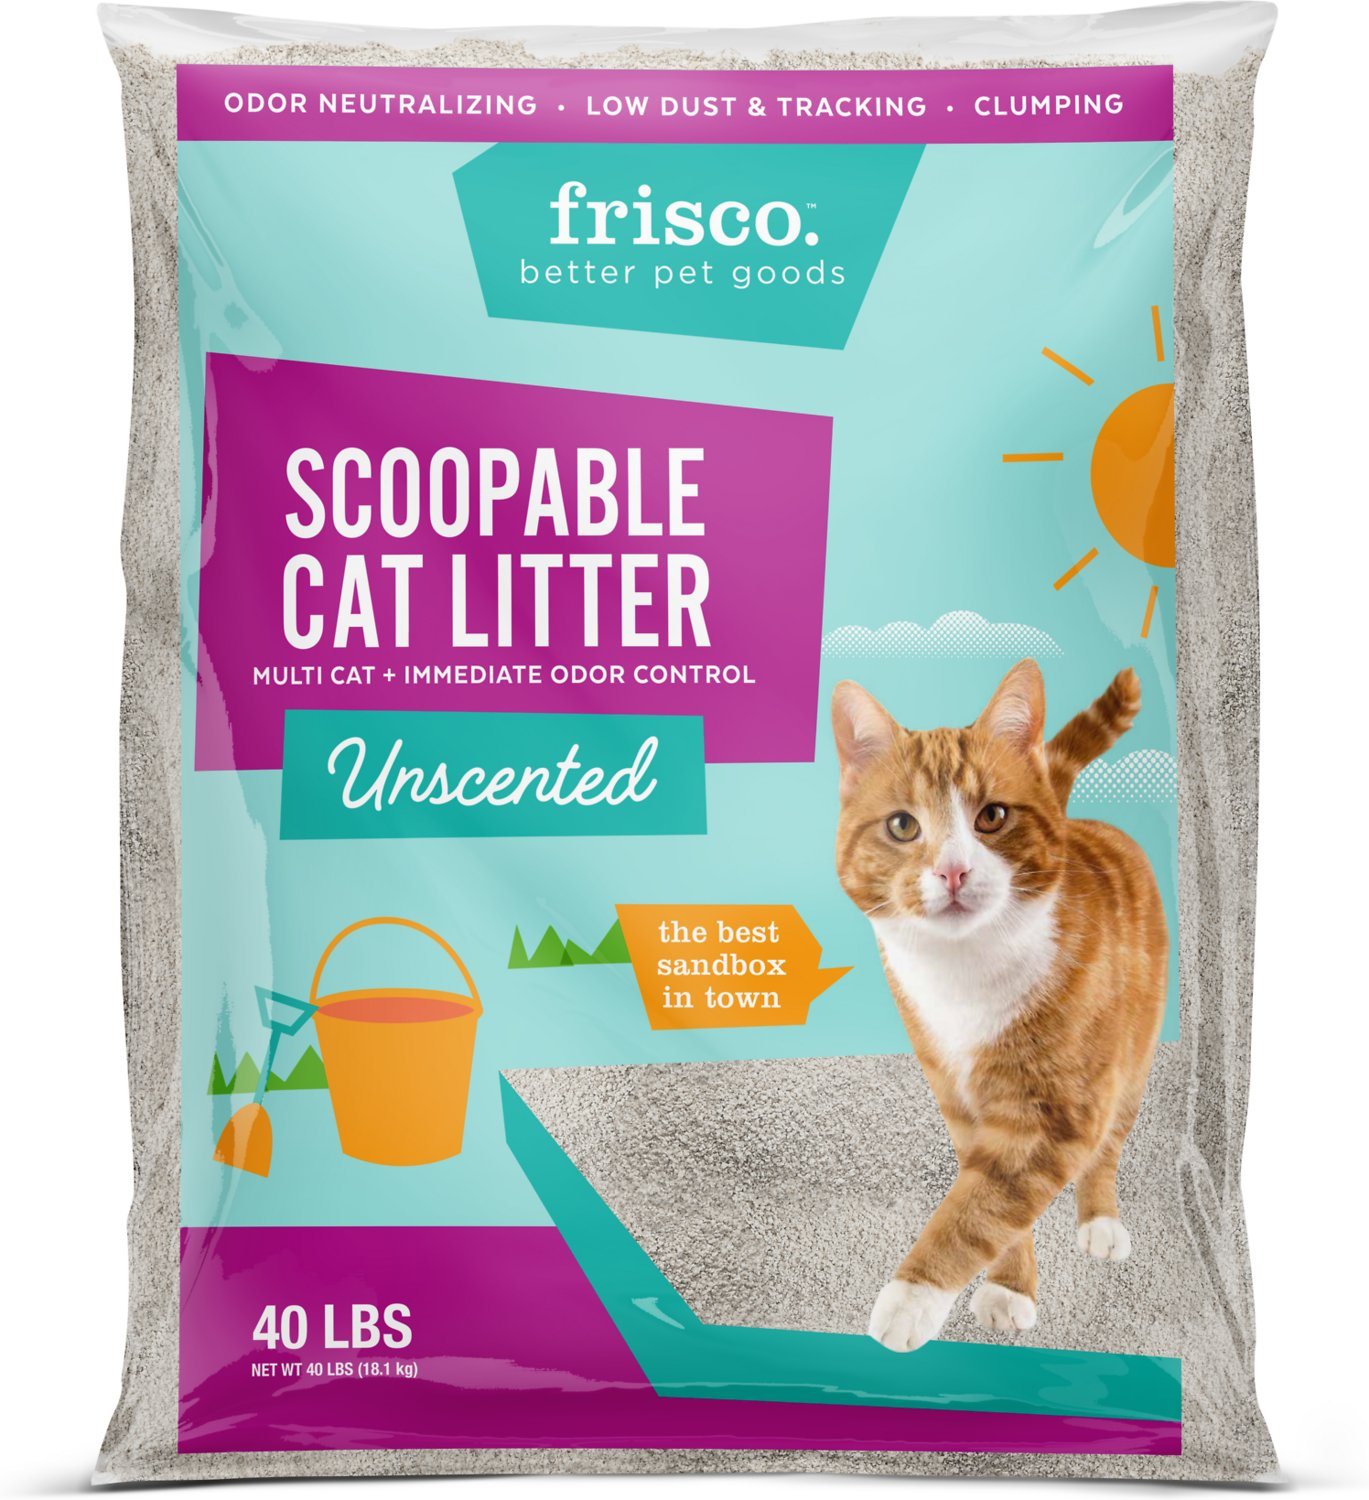 The Best Cat Litter Brands of 2018 | Reviews, Ratings ...